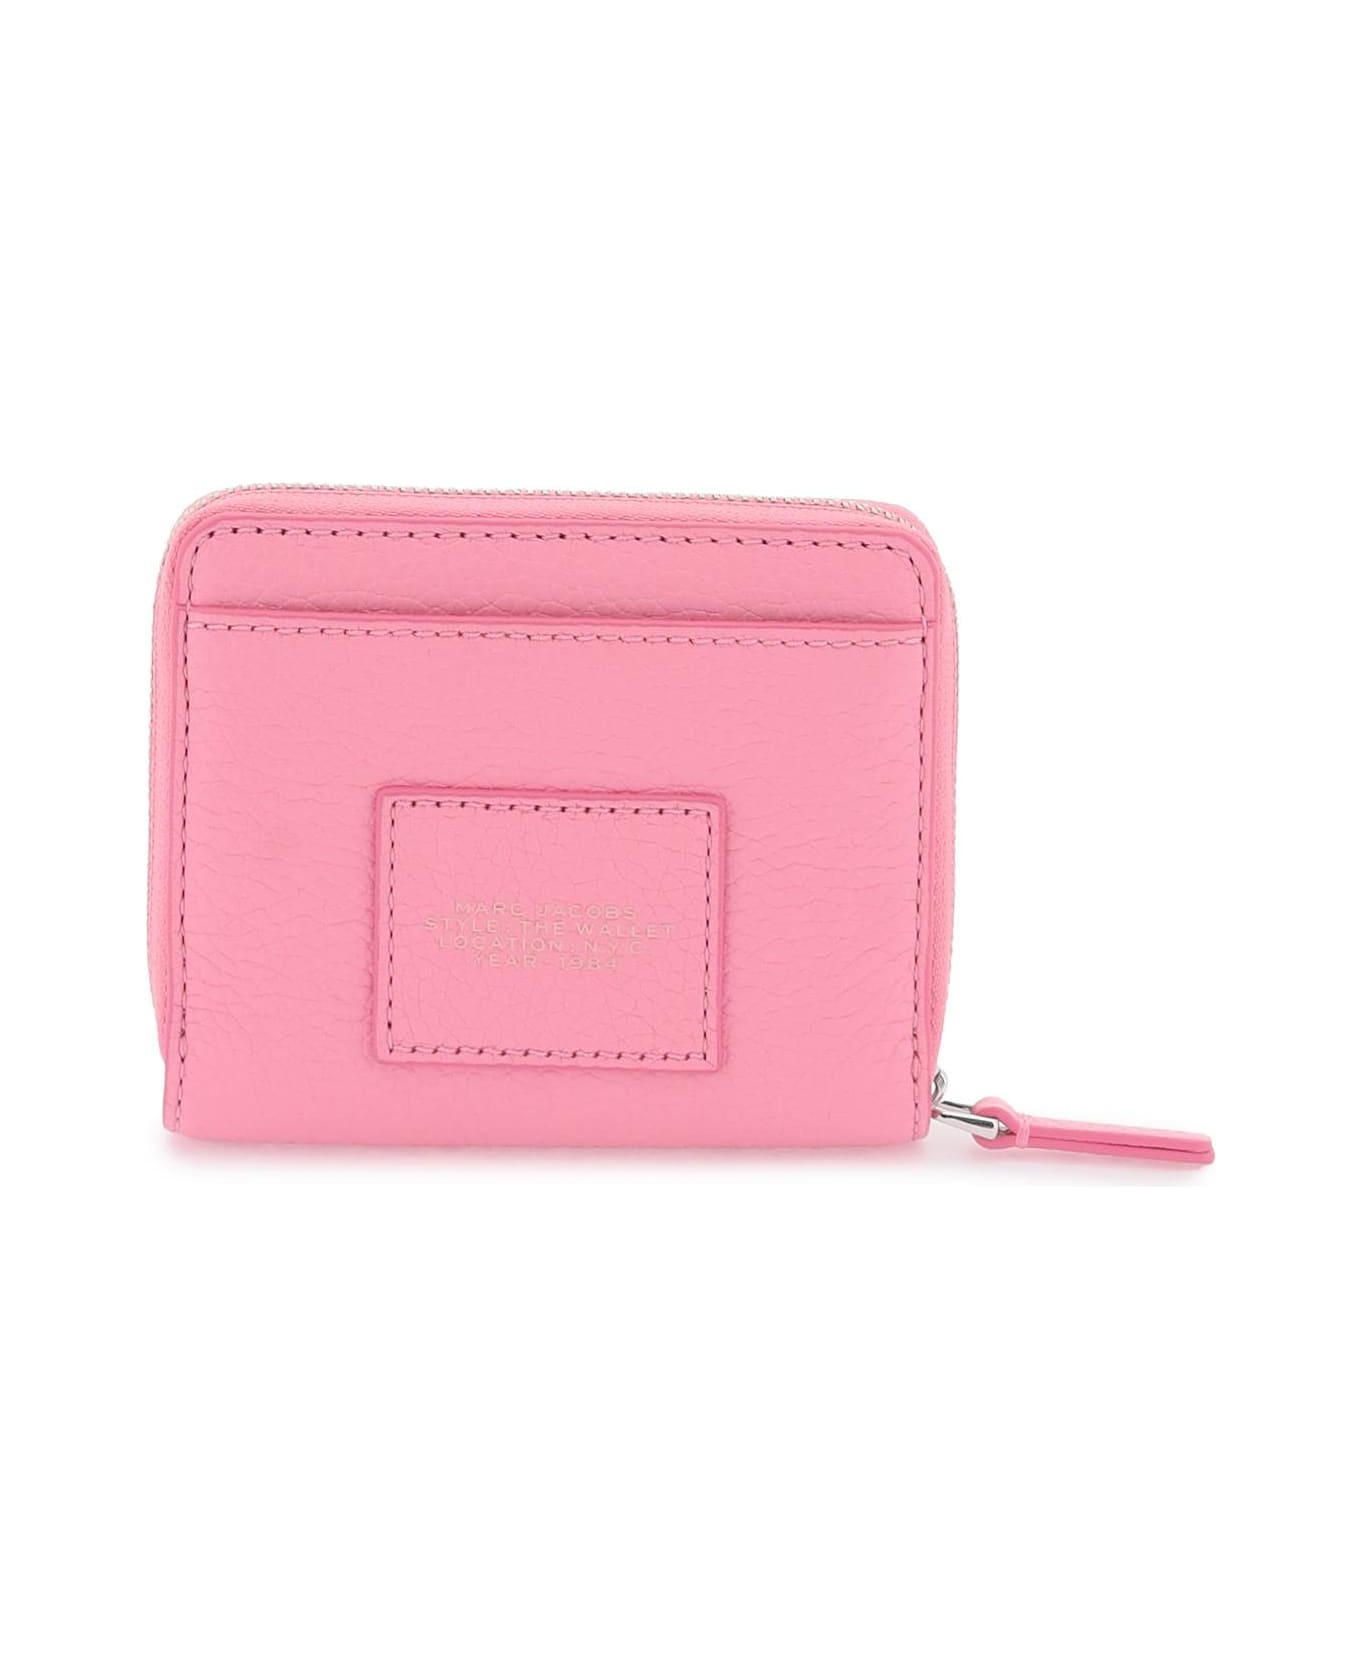 Marc Jacobs The Leather Mini Compact Wallet - PETAL PINK (Pink)